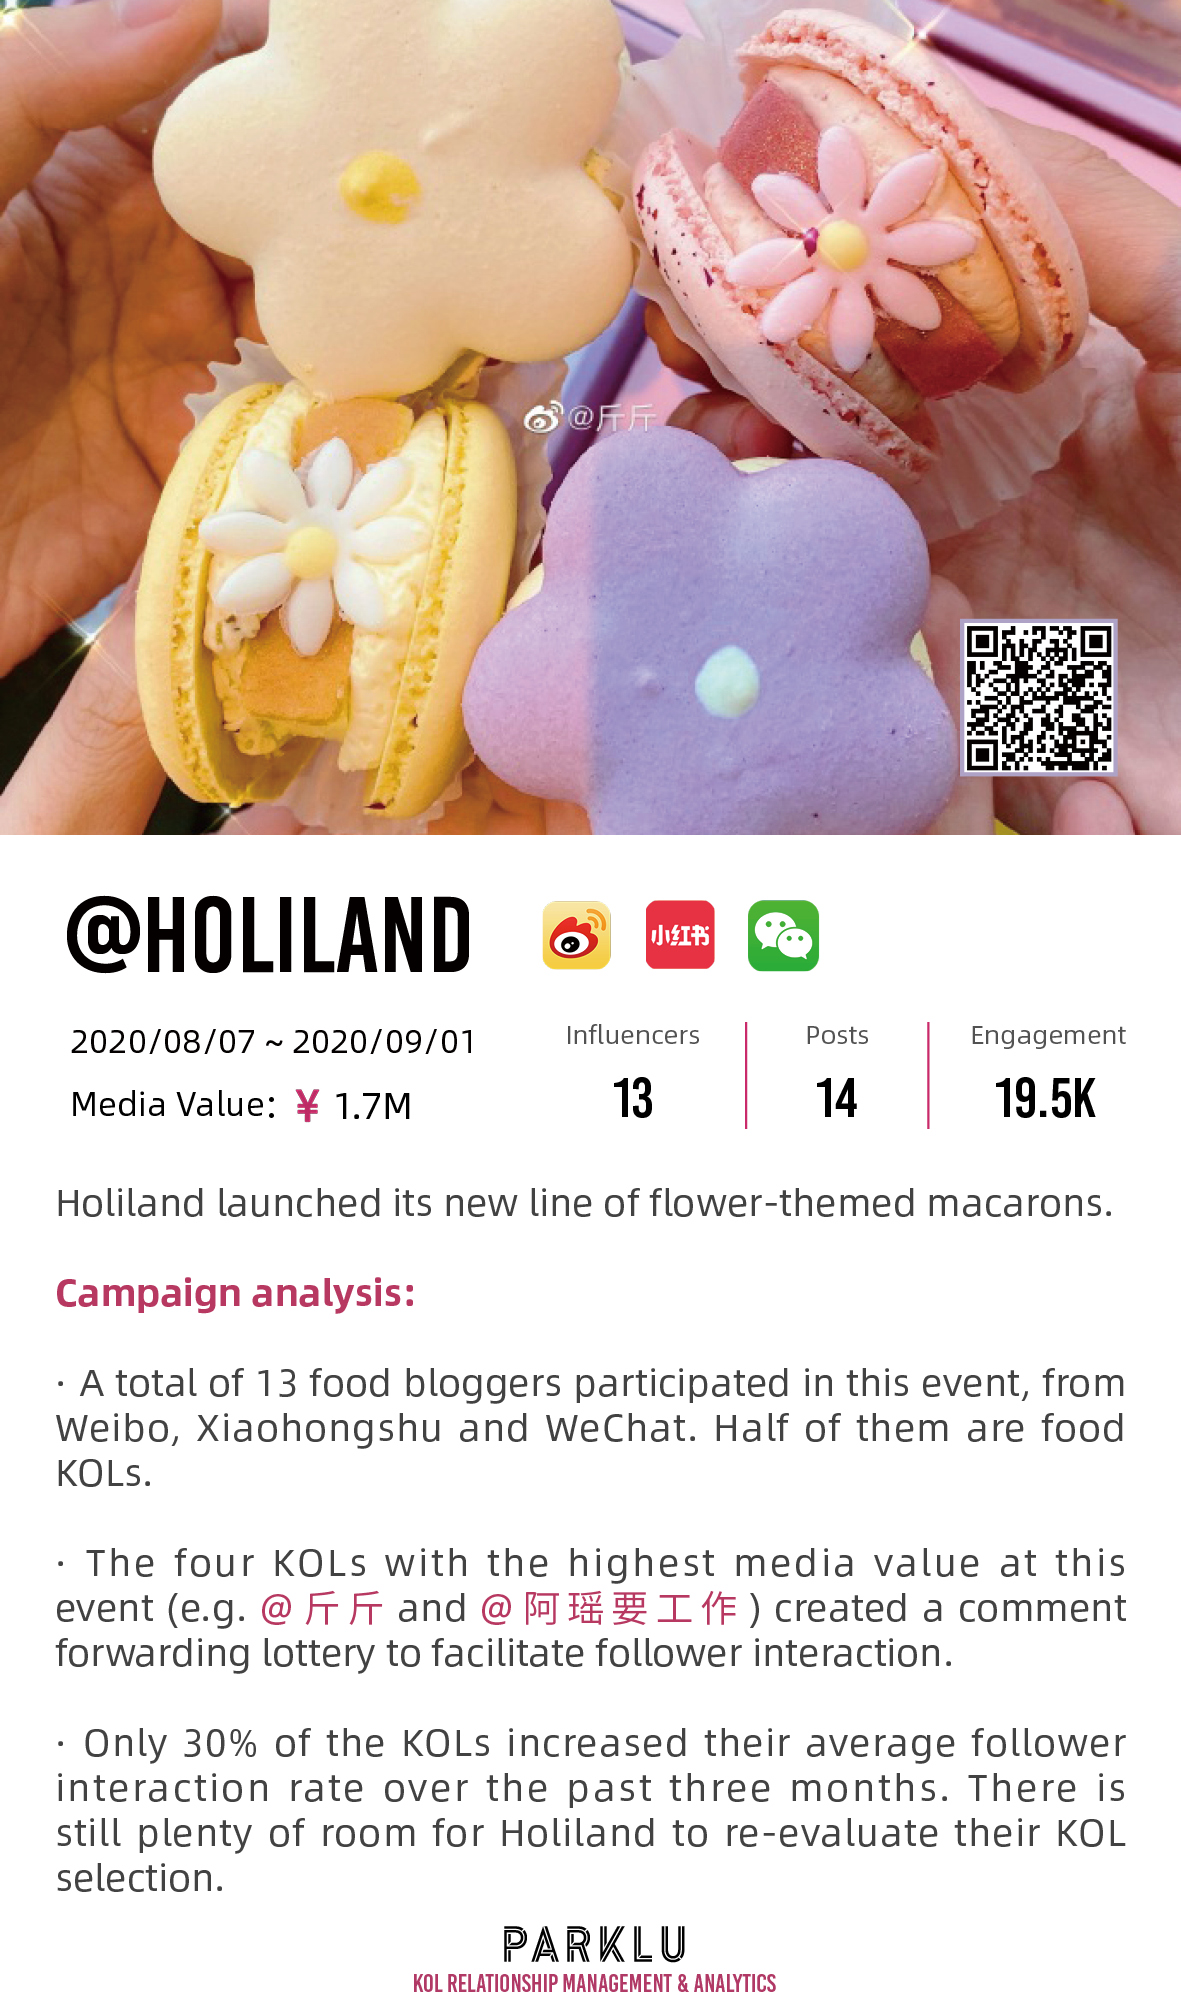 Holiland Flower-themed Macarons